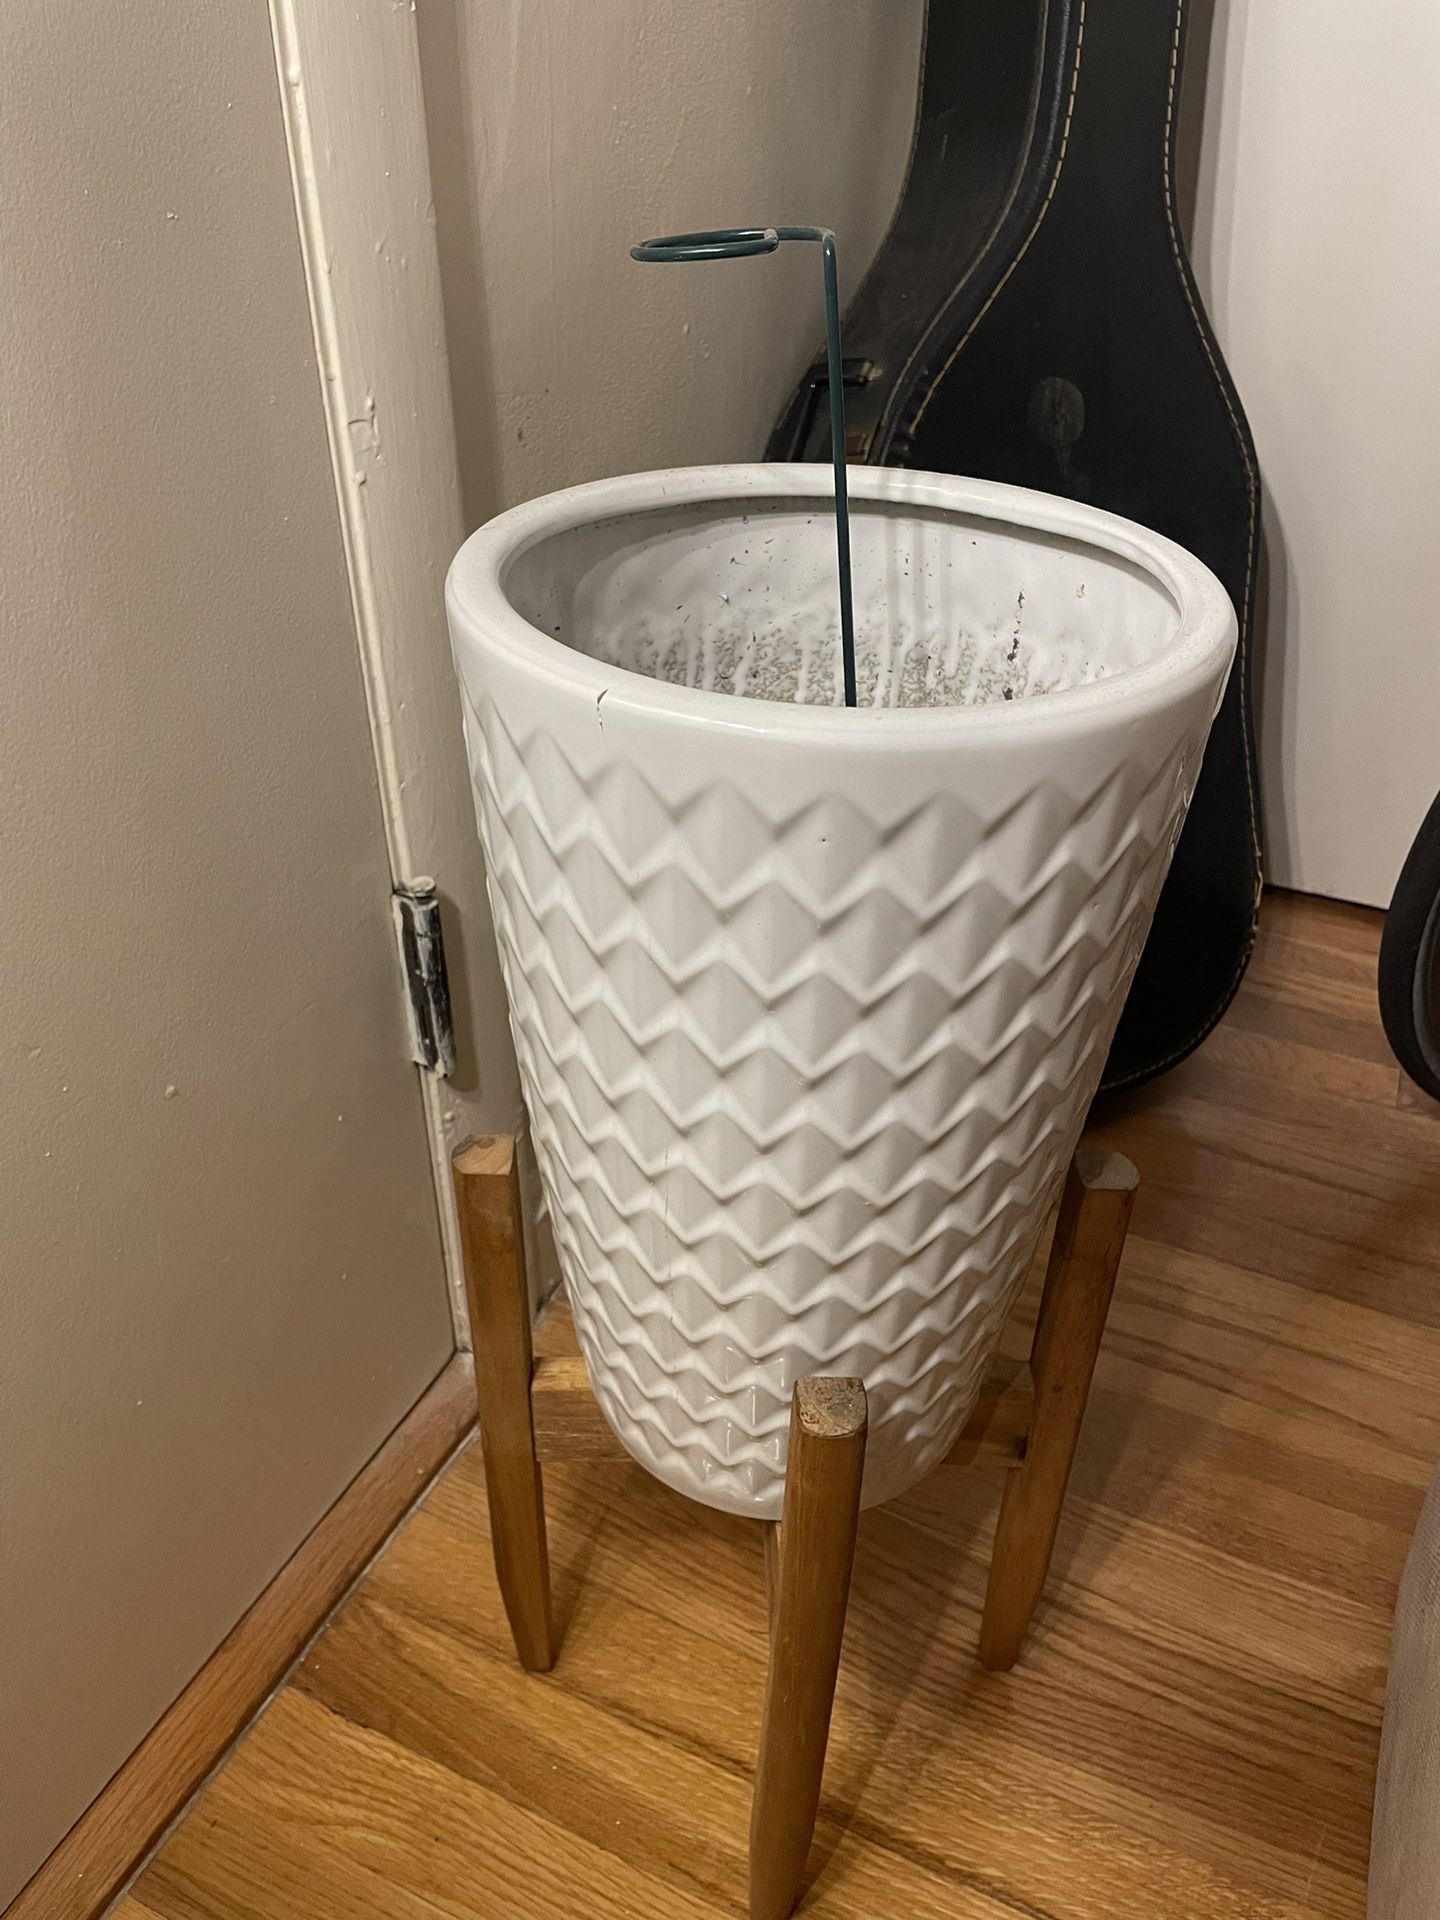 Large Plant Pot With Stand 